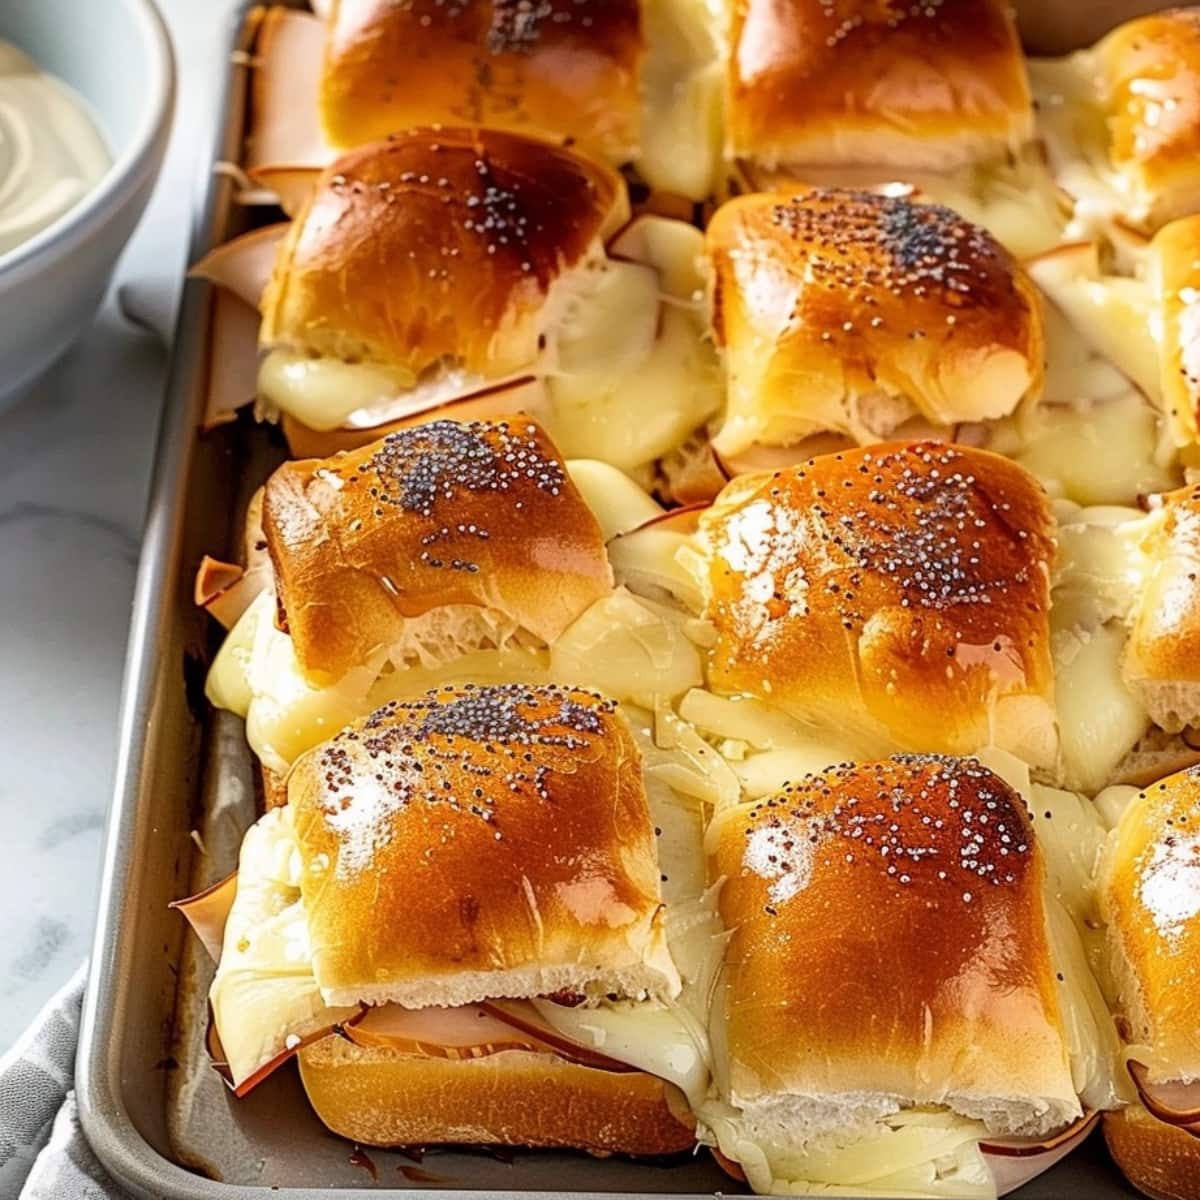 Slider rolls with turkey and cheese filling on a sheet pan.